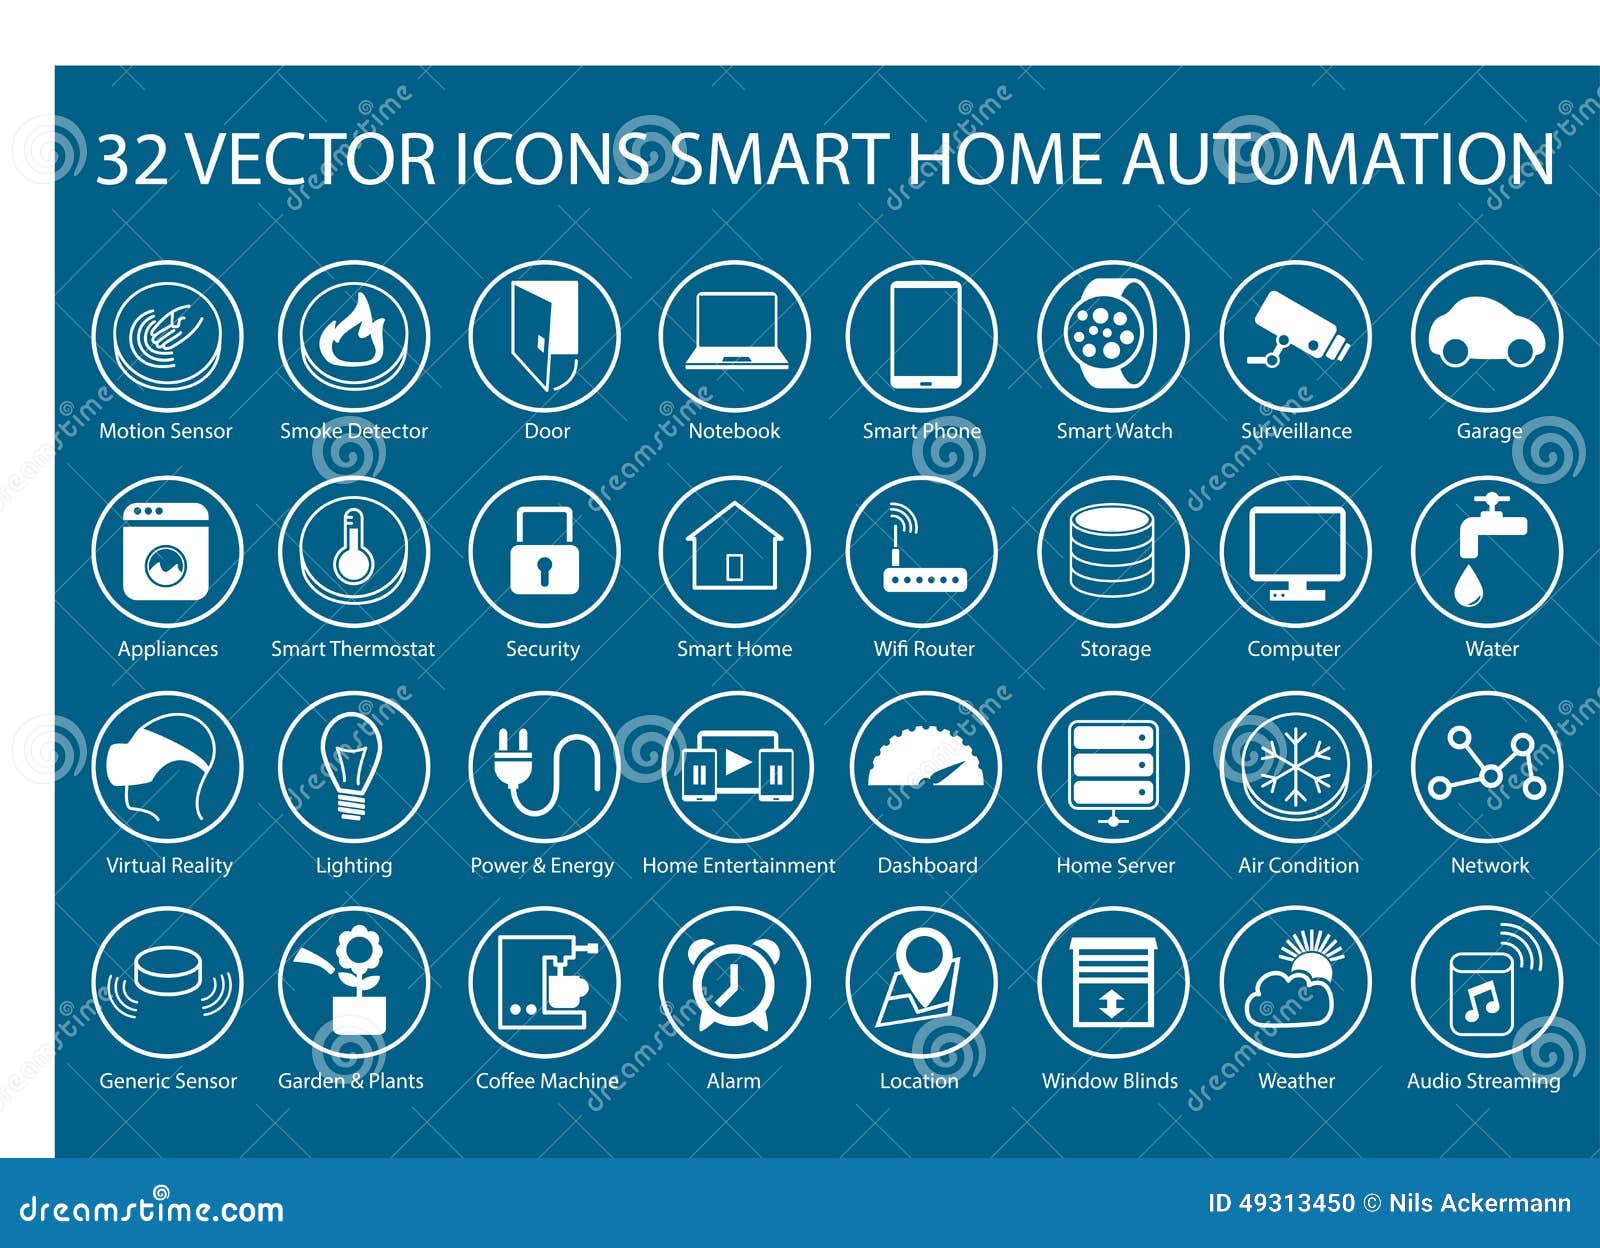 home automation clipart - photo #10